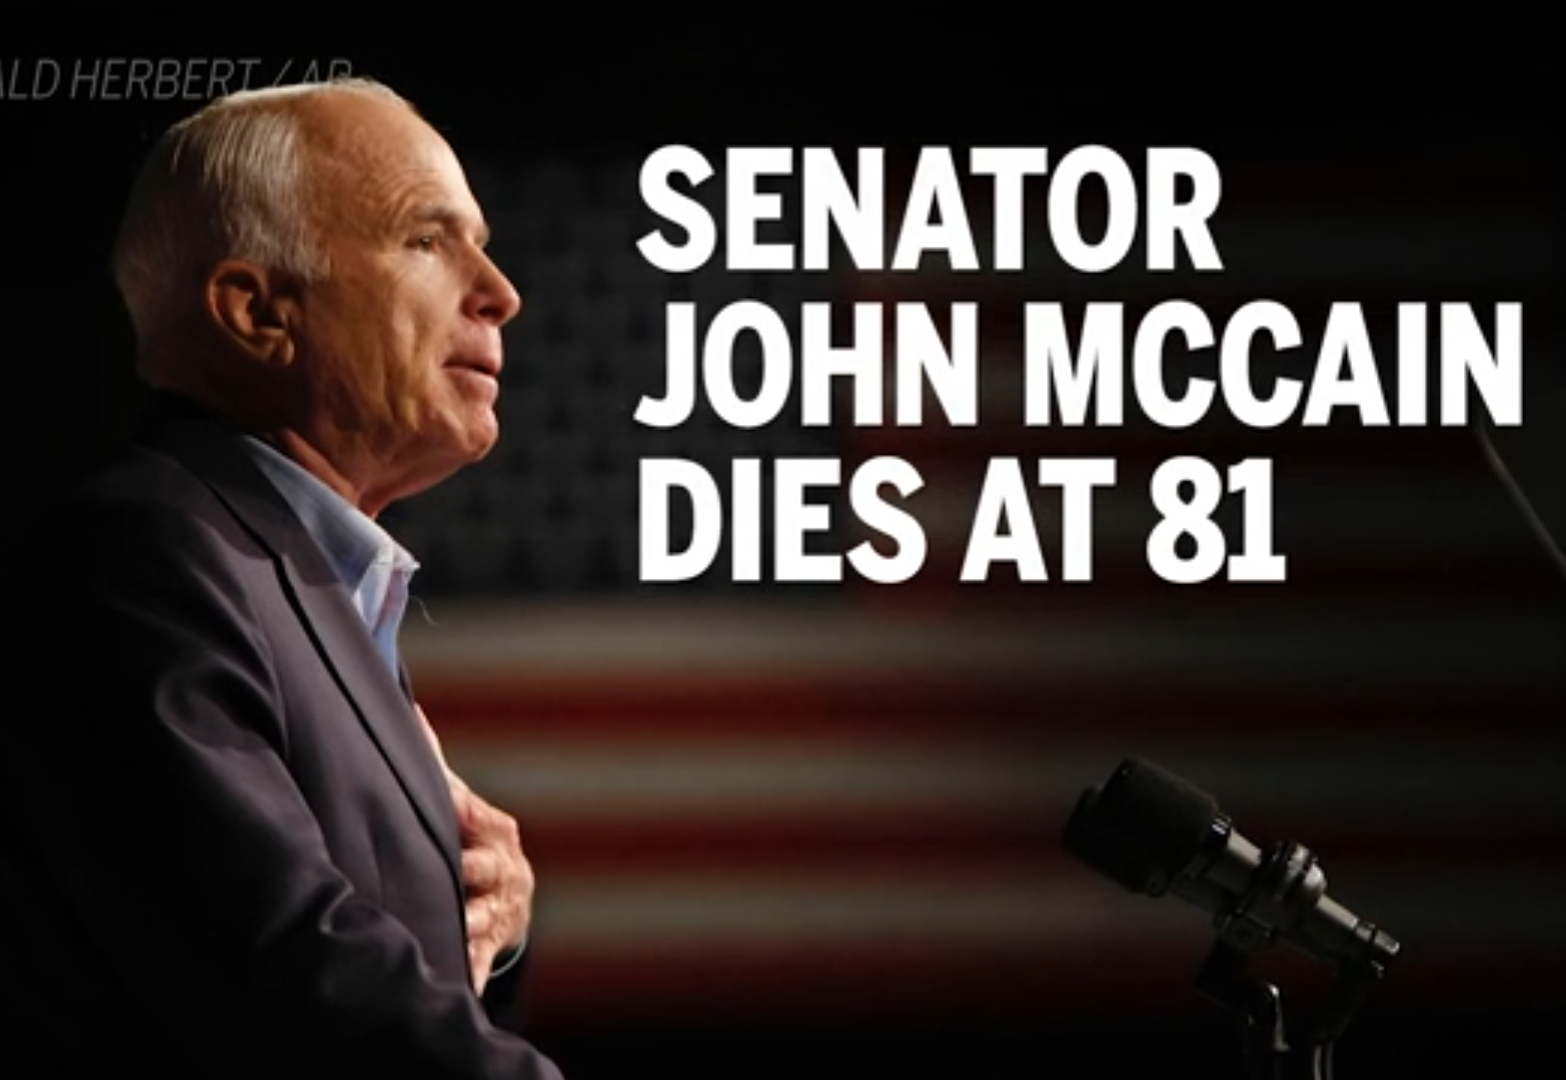 John McCain wrote a farewell letter to America before he died